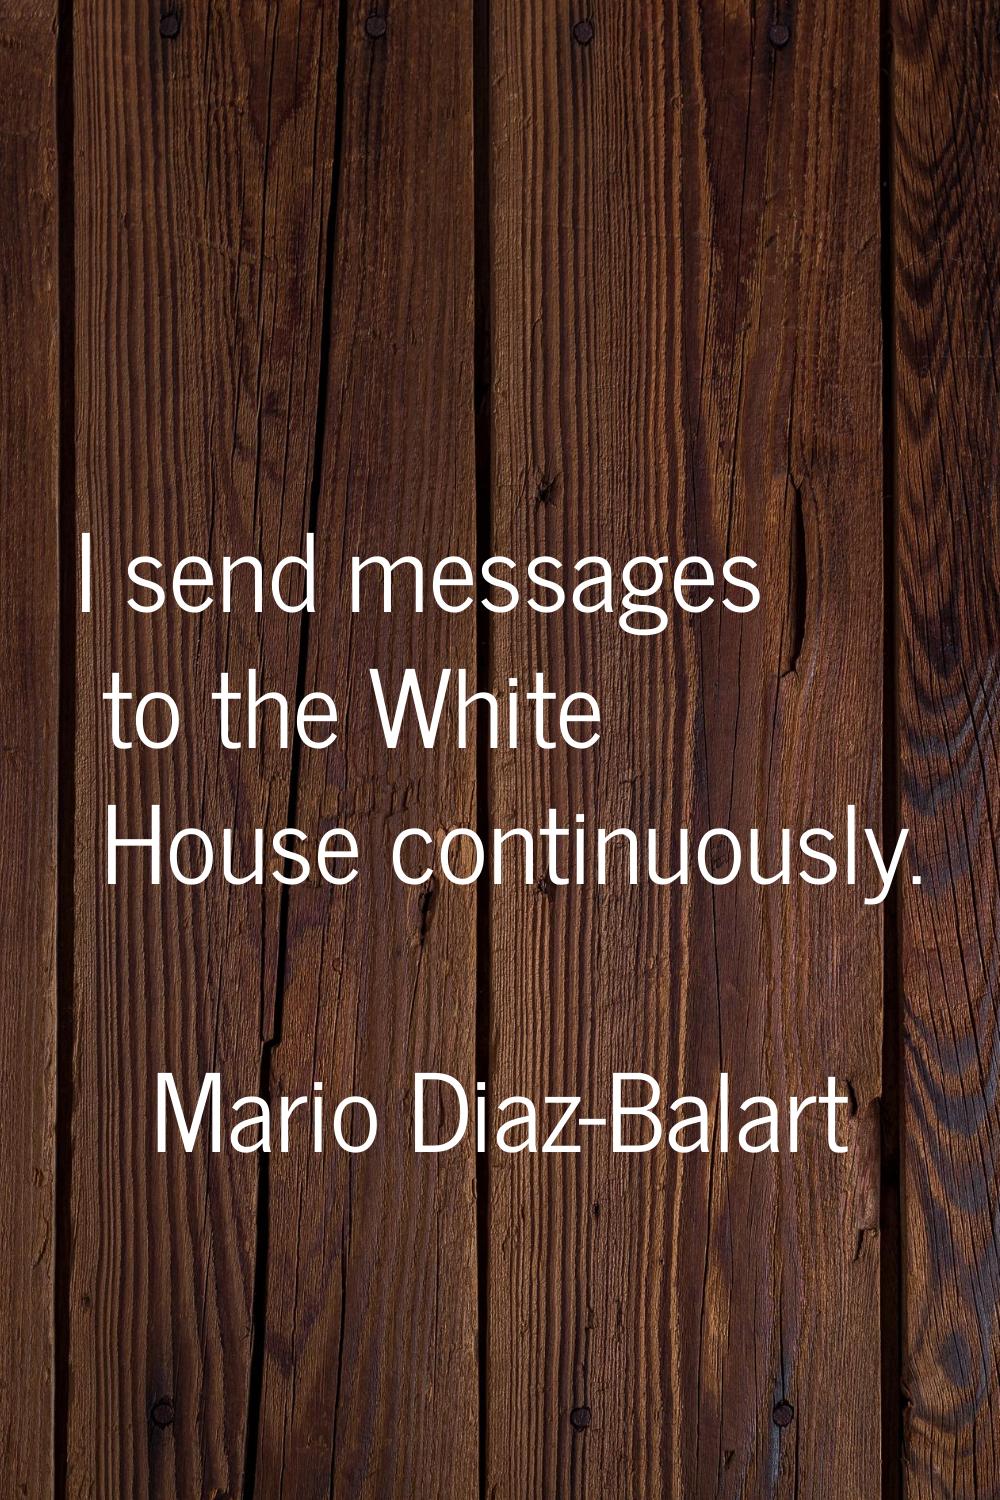 I send messages to the White House continuously.